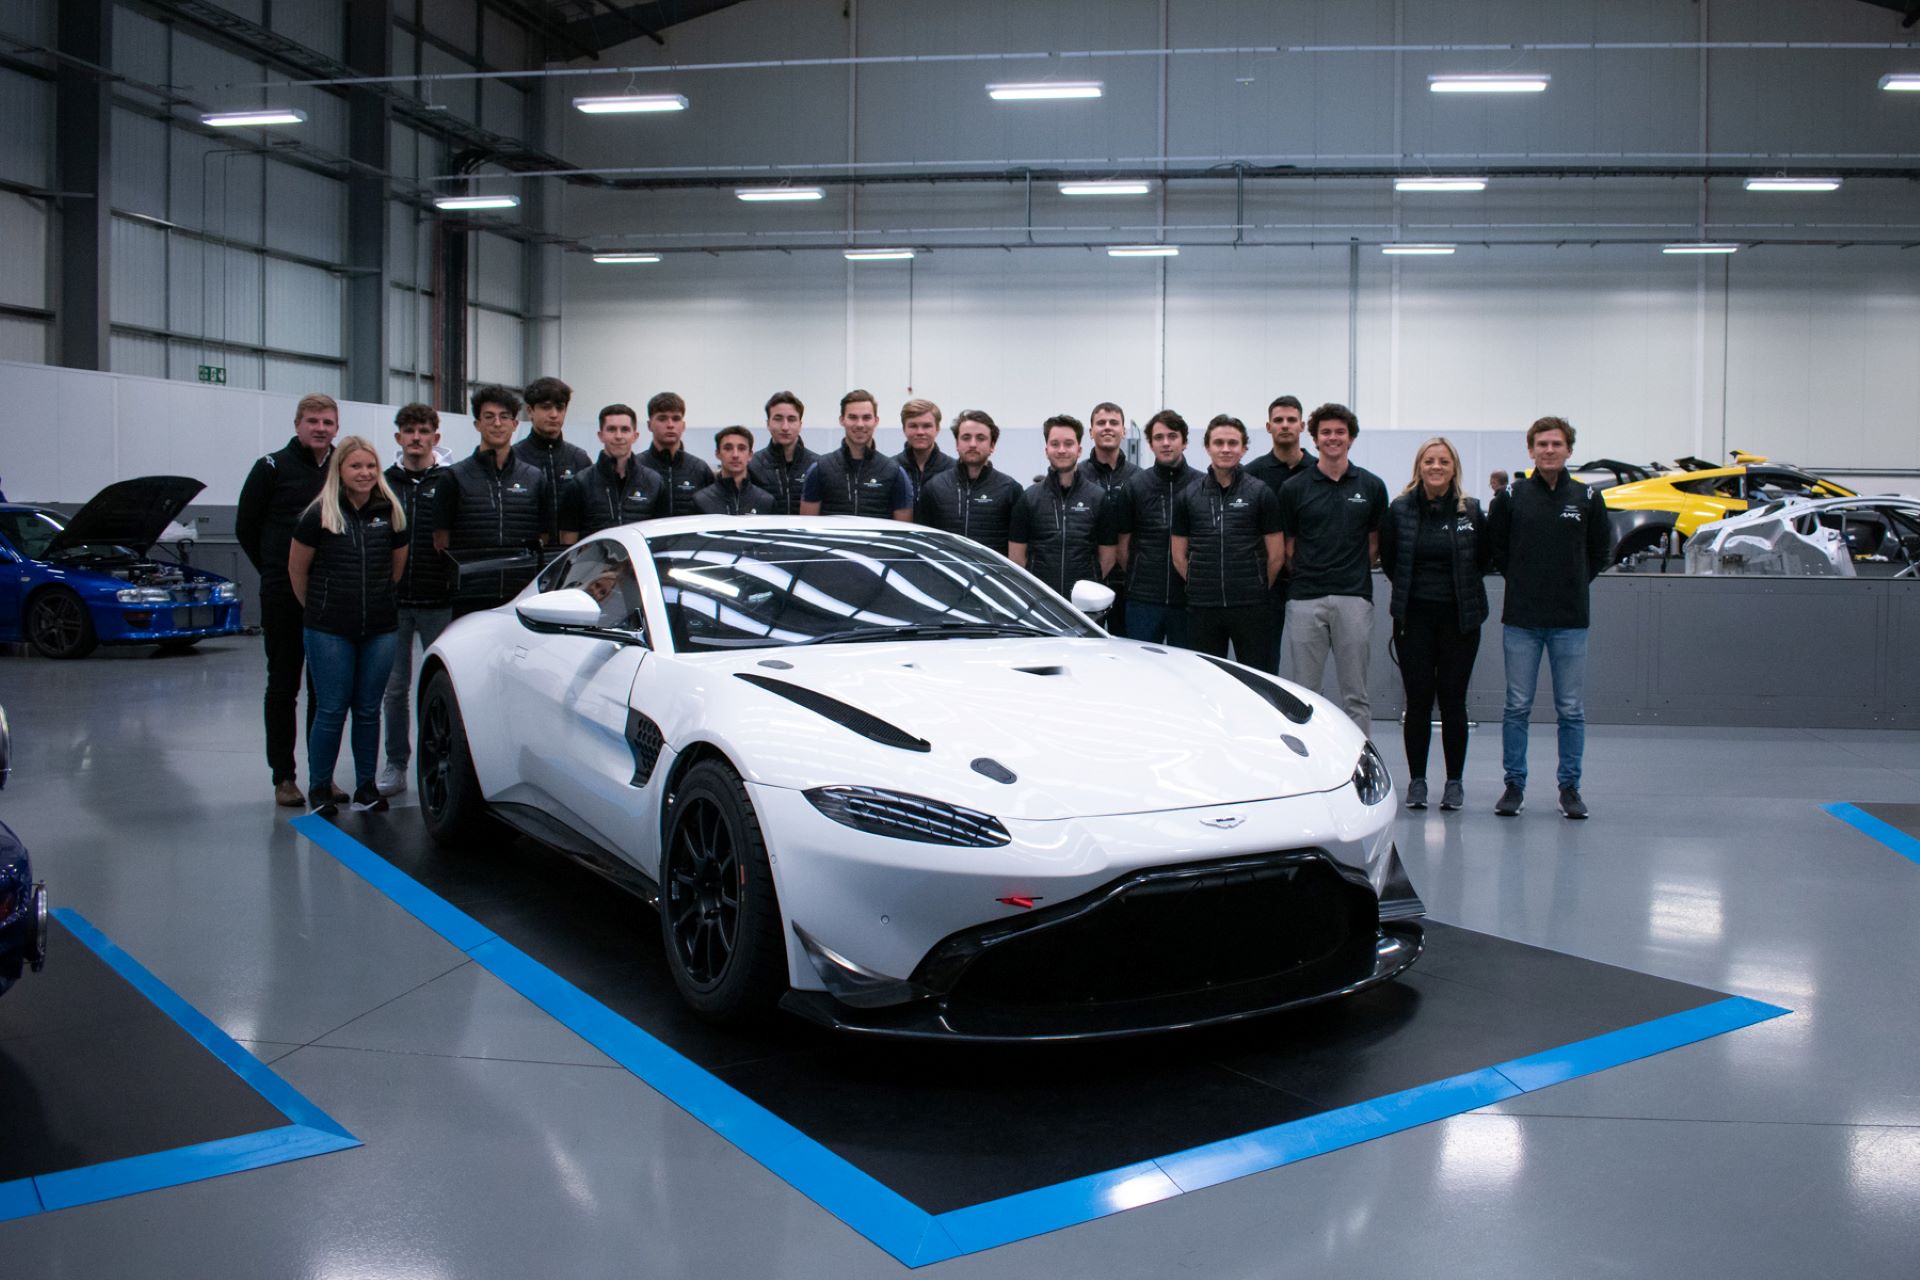 Mike David Ortmann becomes latest champion to graduate from Aston Martin Racing Driver Academy